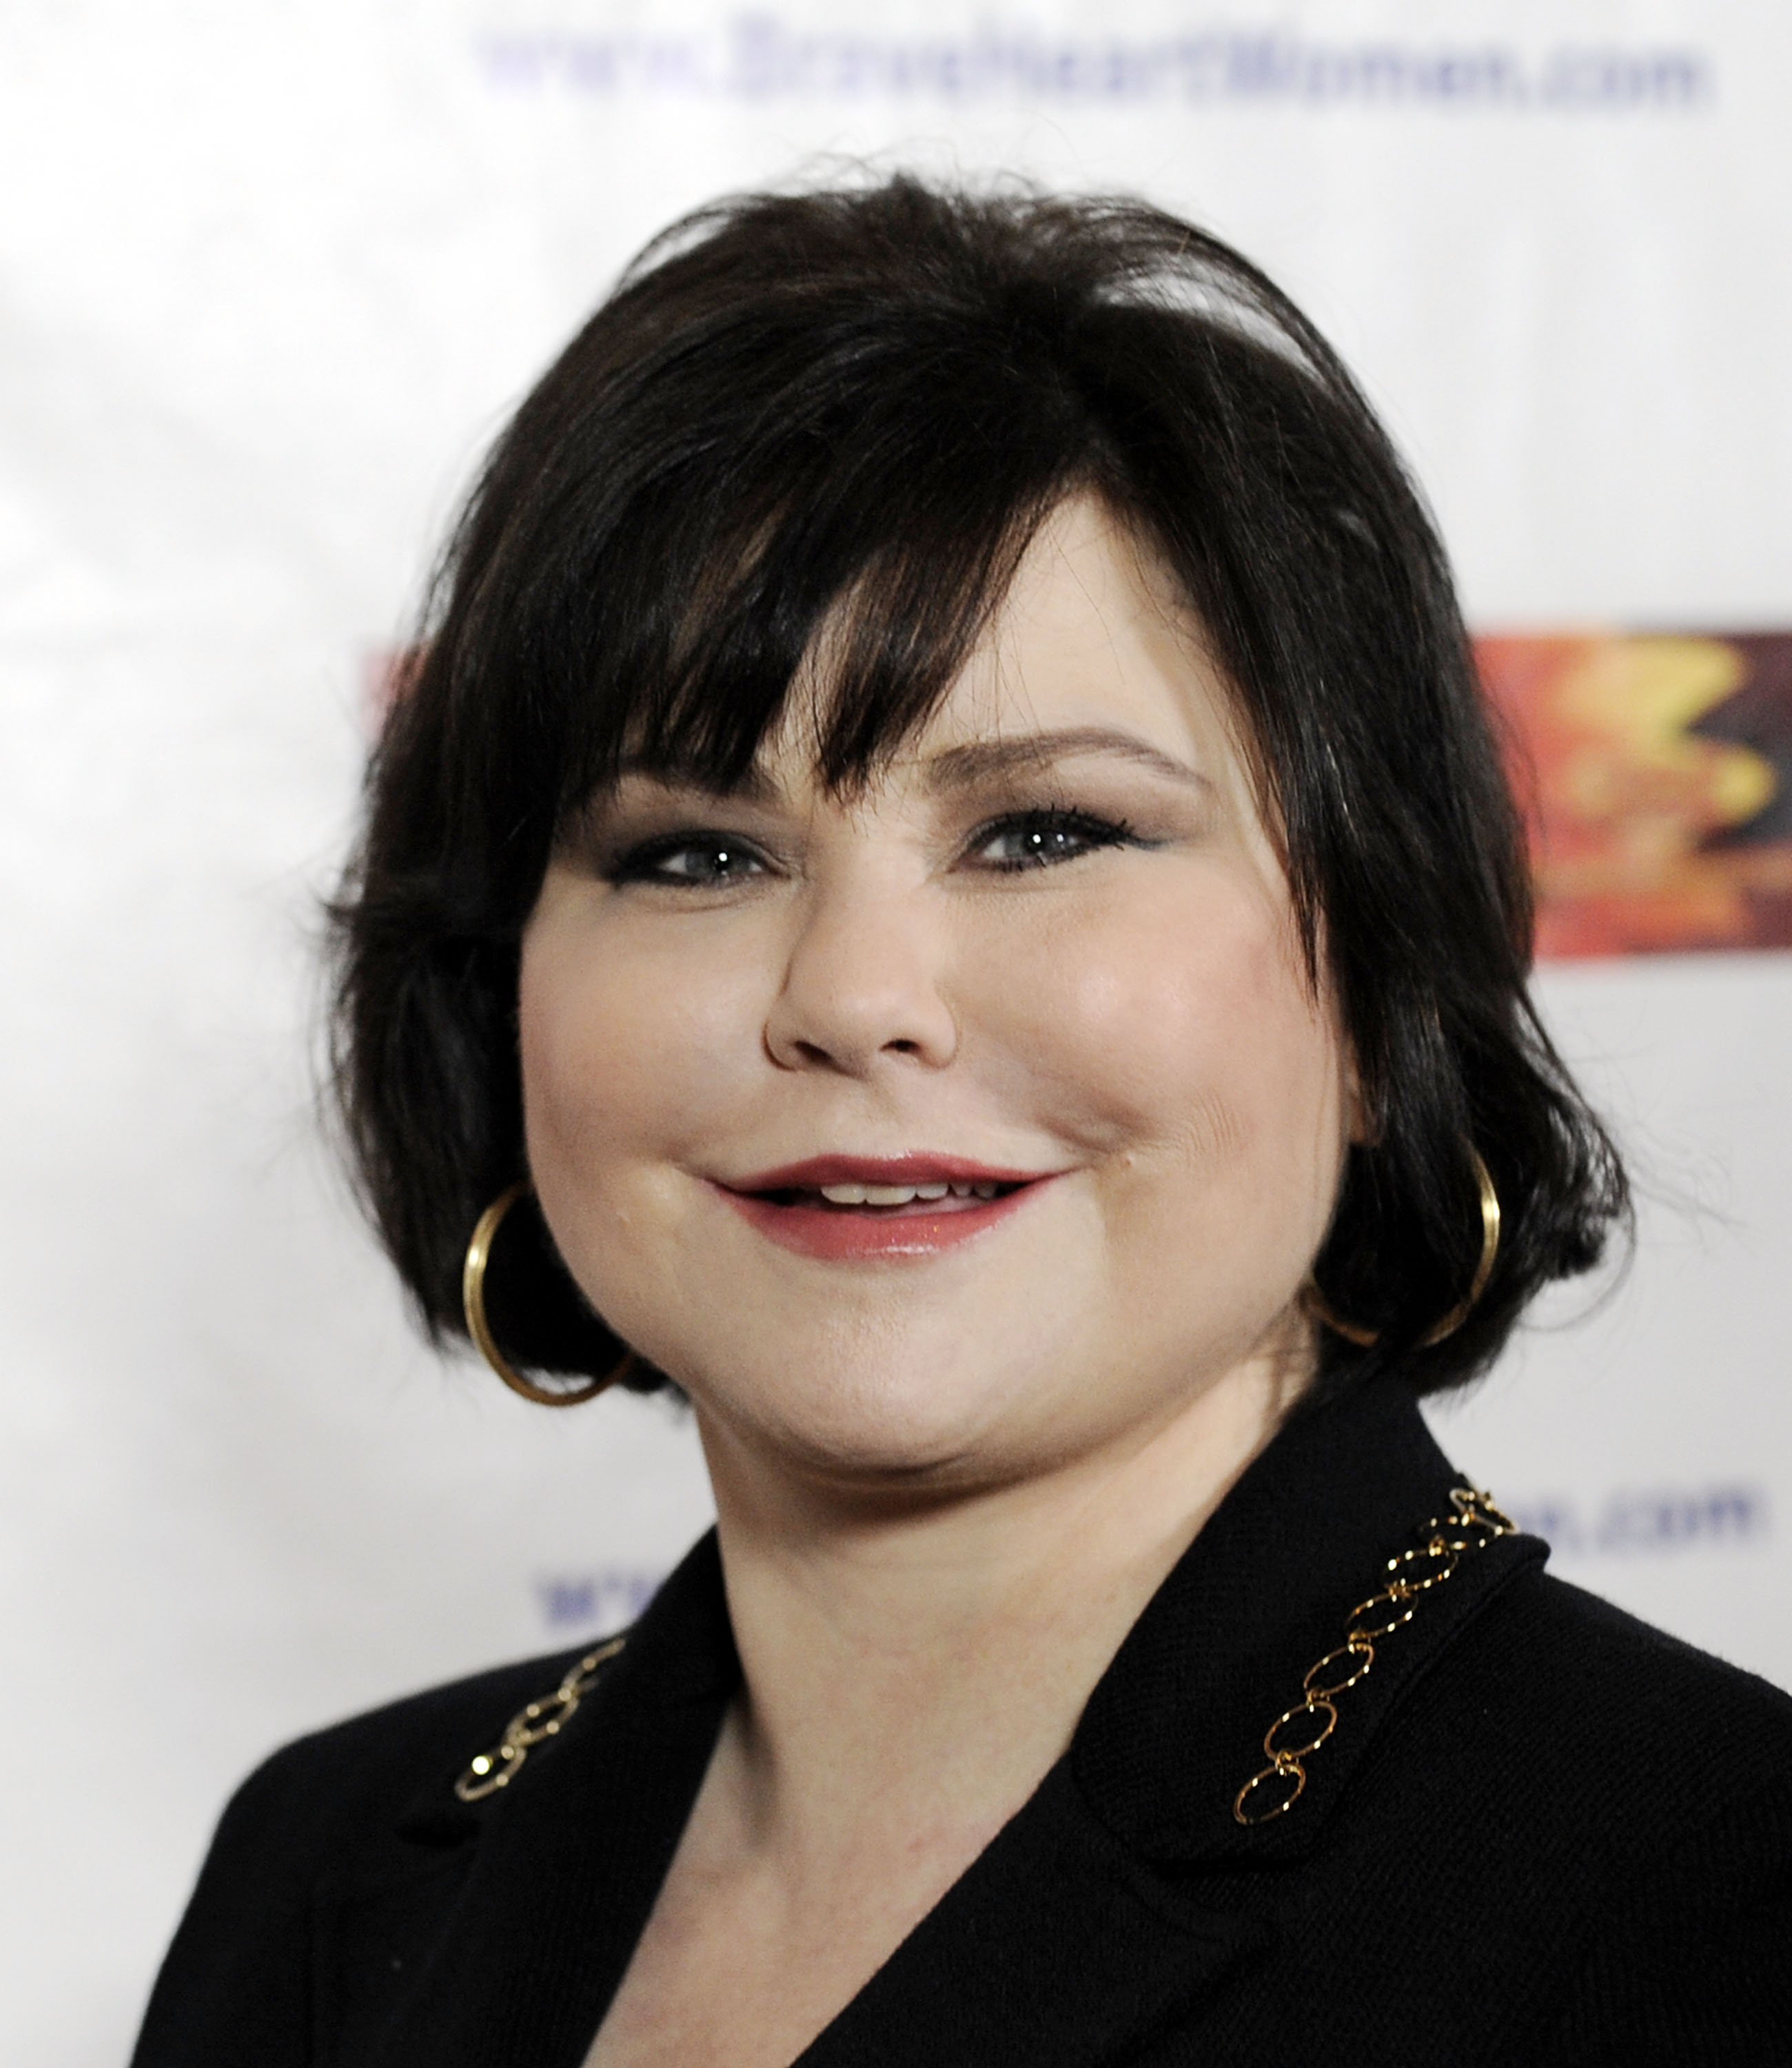 Delta Burke at the BraveHeart Awards on October 3, 2009, in Los Angeles | Source: Getty Images